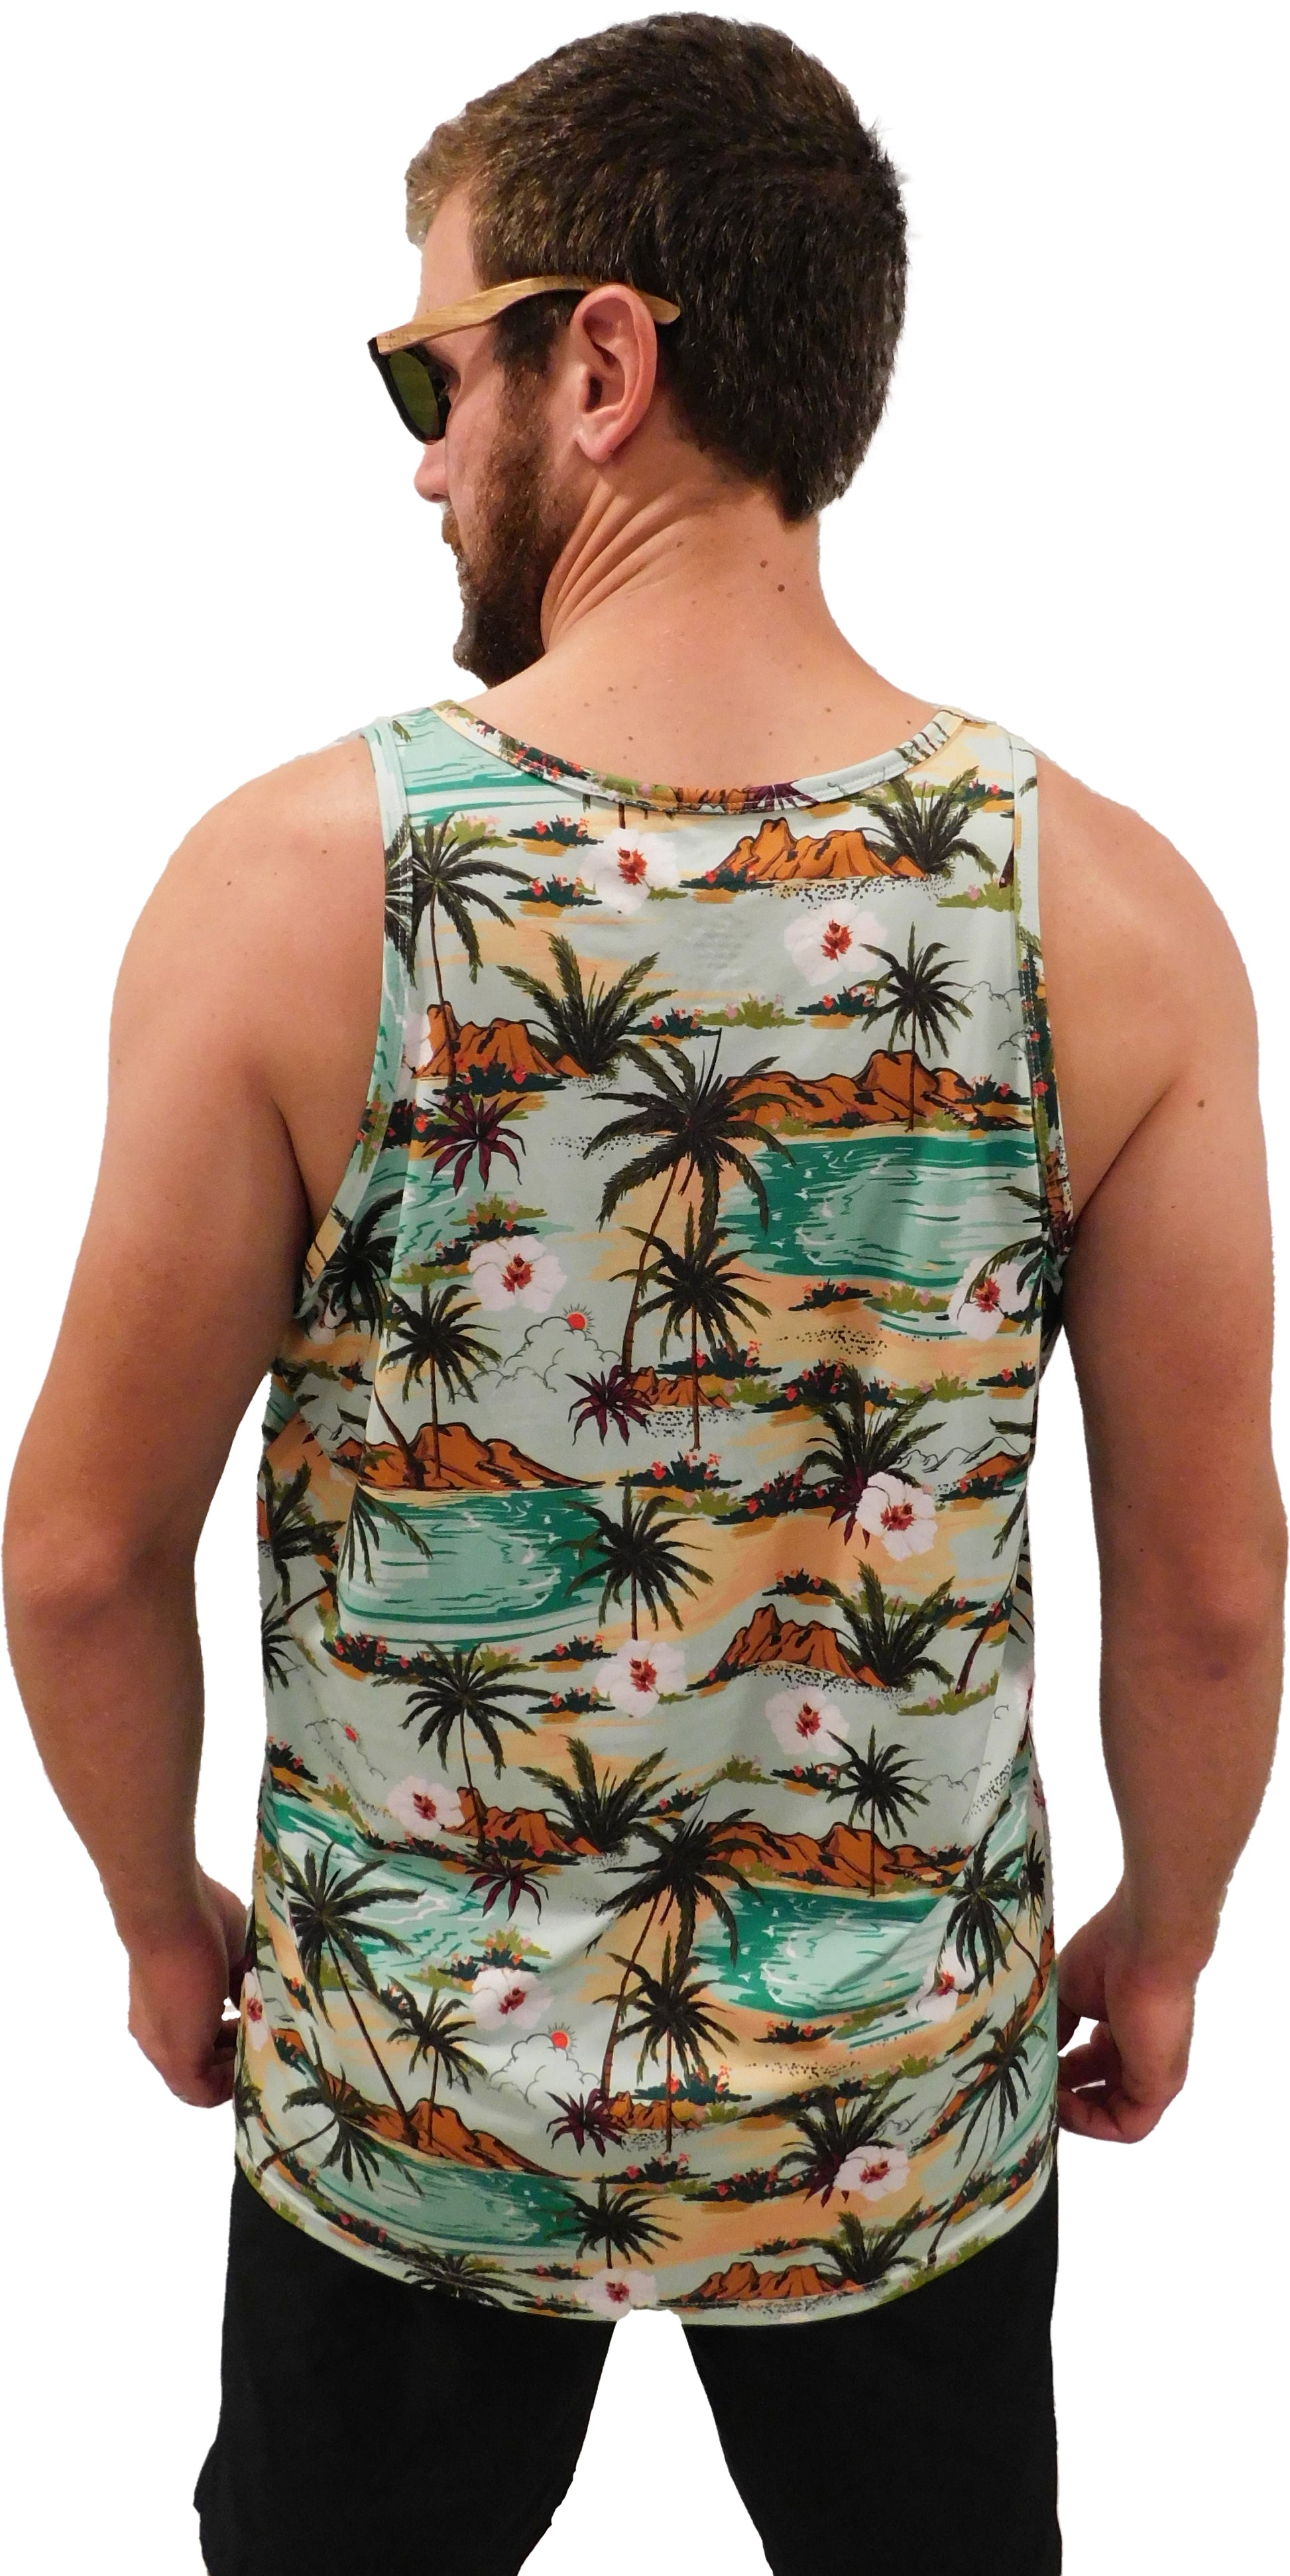 a man wearing a tank top with palm trees on it